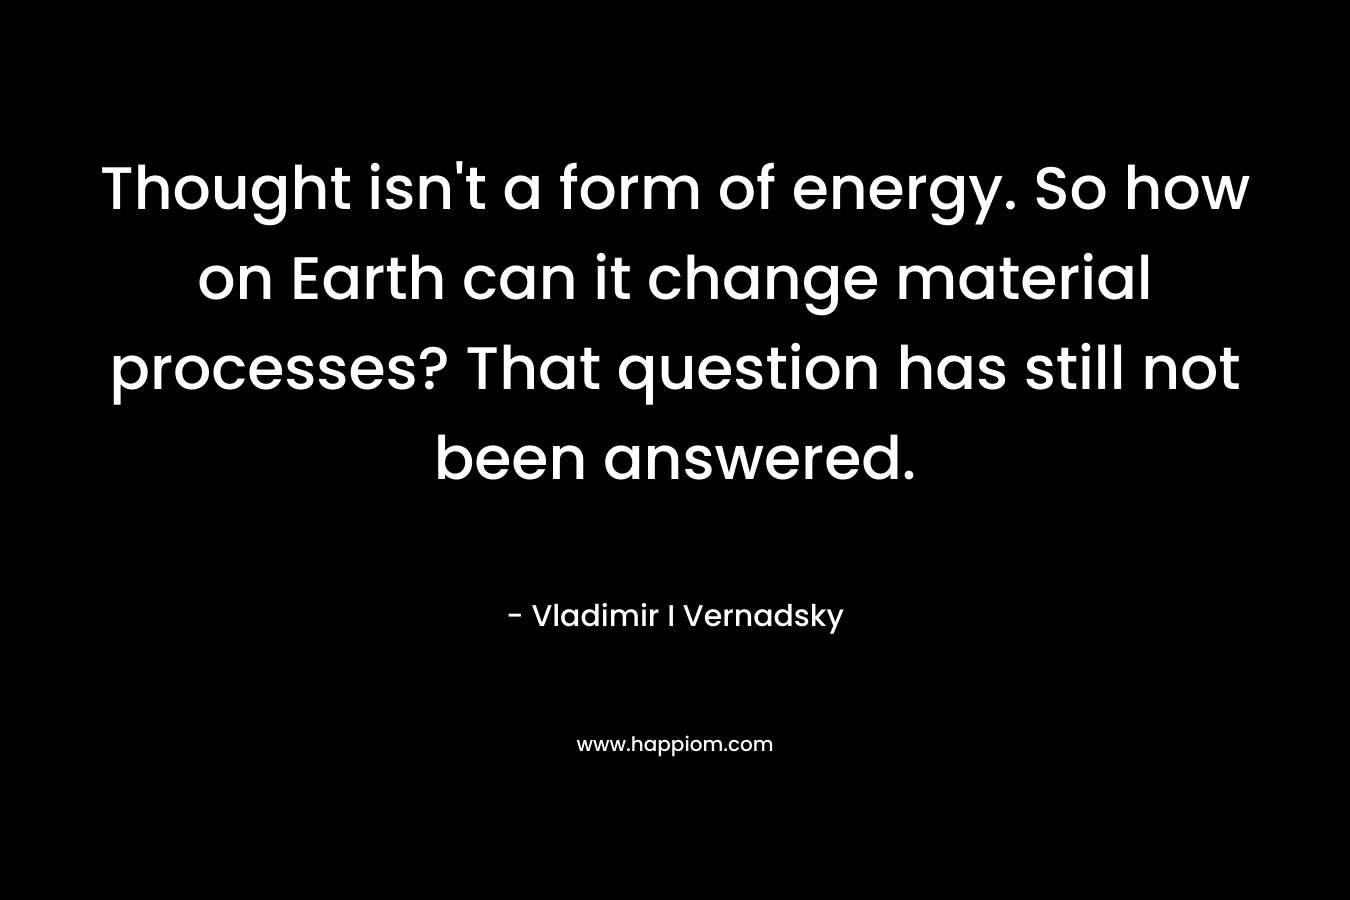 Thought isn’t a form of energy. So how on Earth can it change material processes? That question has still not been answered. – Vladimir I Vernadsky